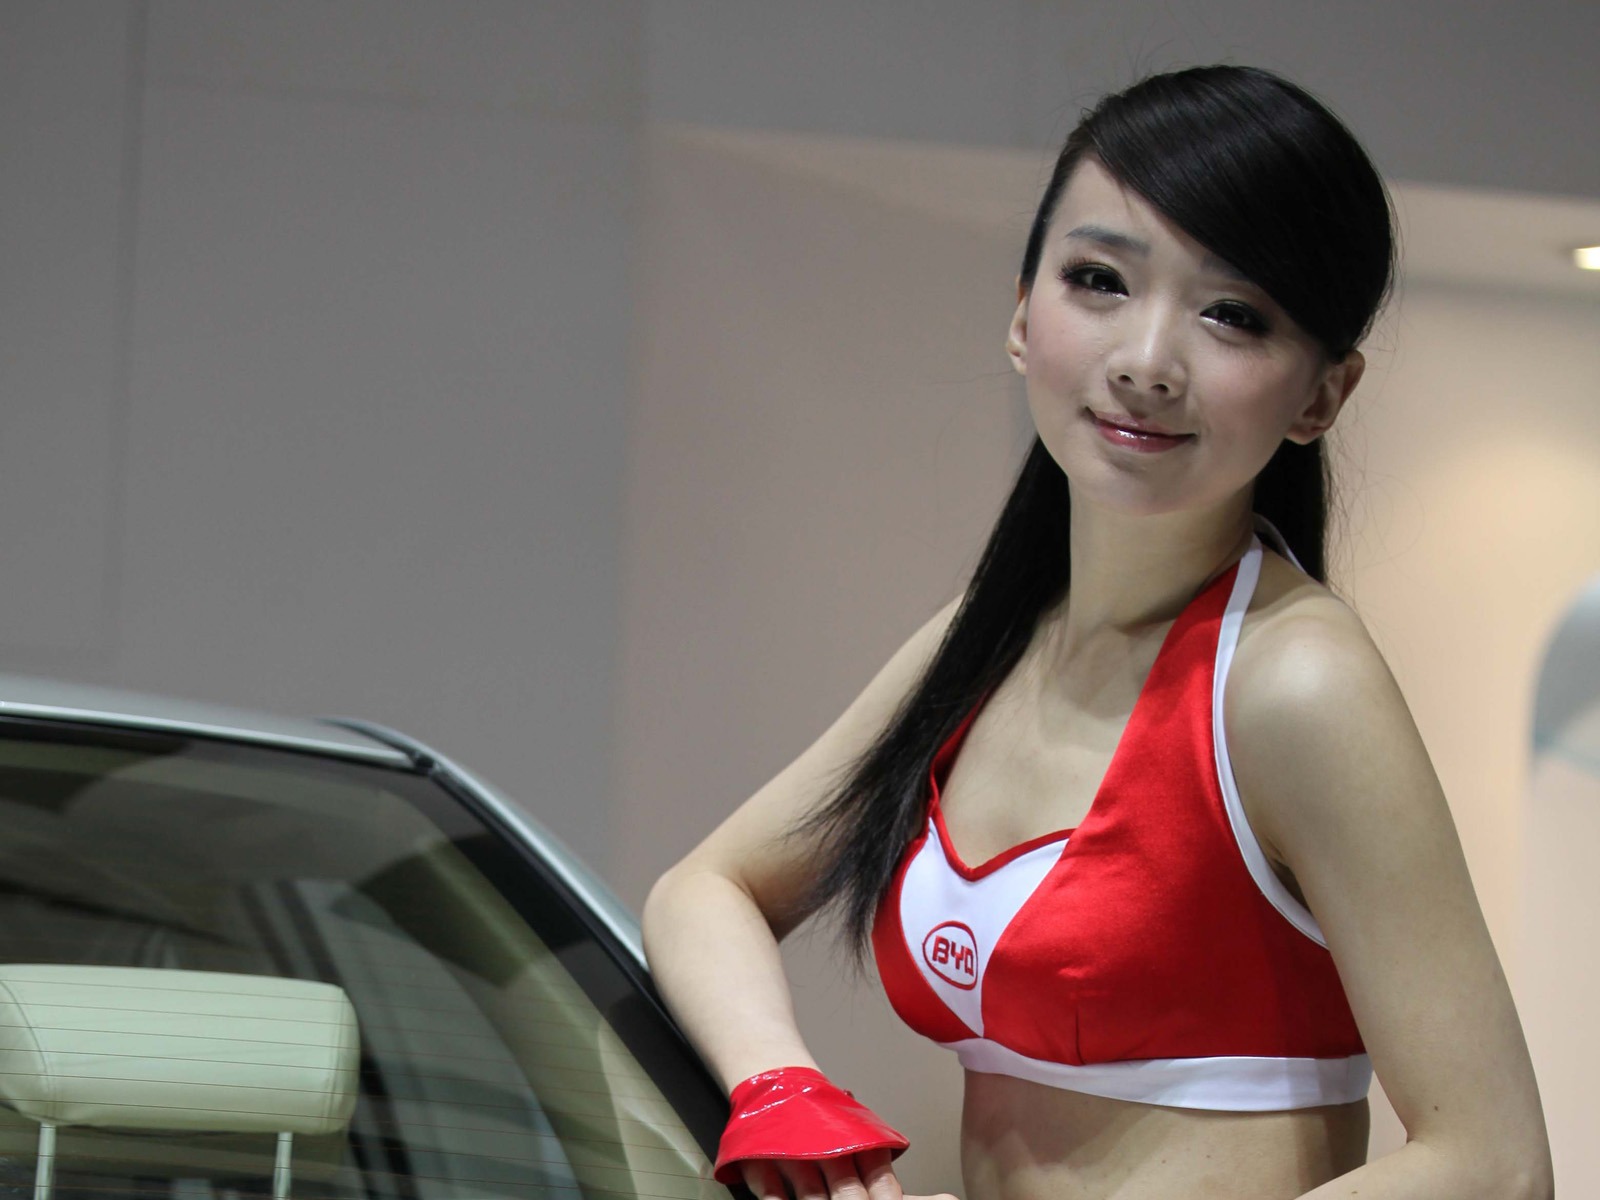 2010 Beijing International Auto Show beauty (1) (the wind chasing the clouds works) #20 - 1600x1200